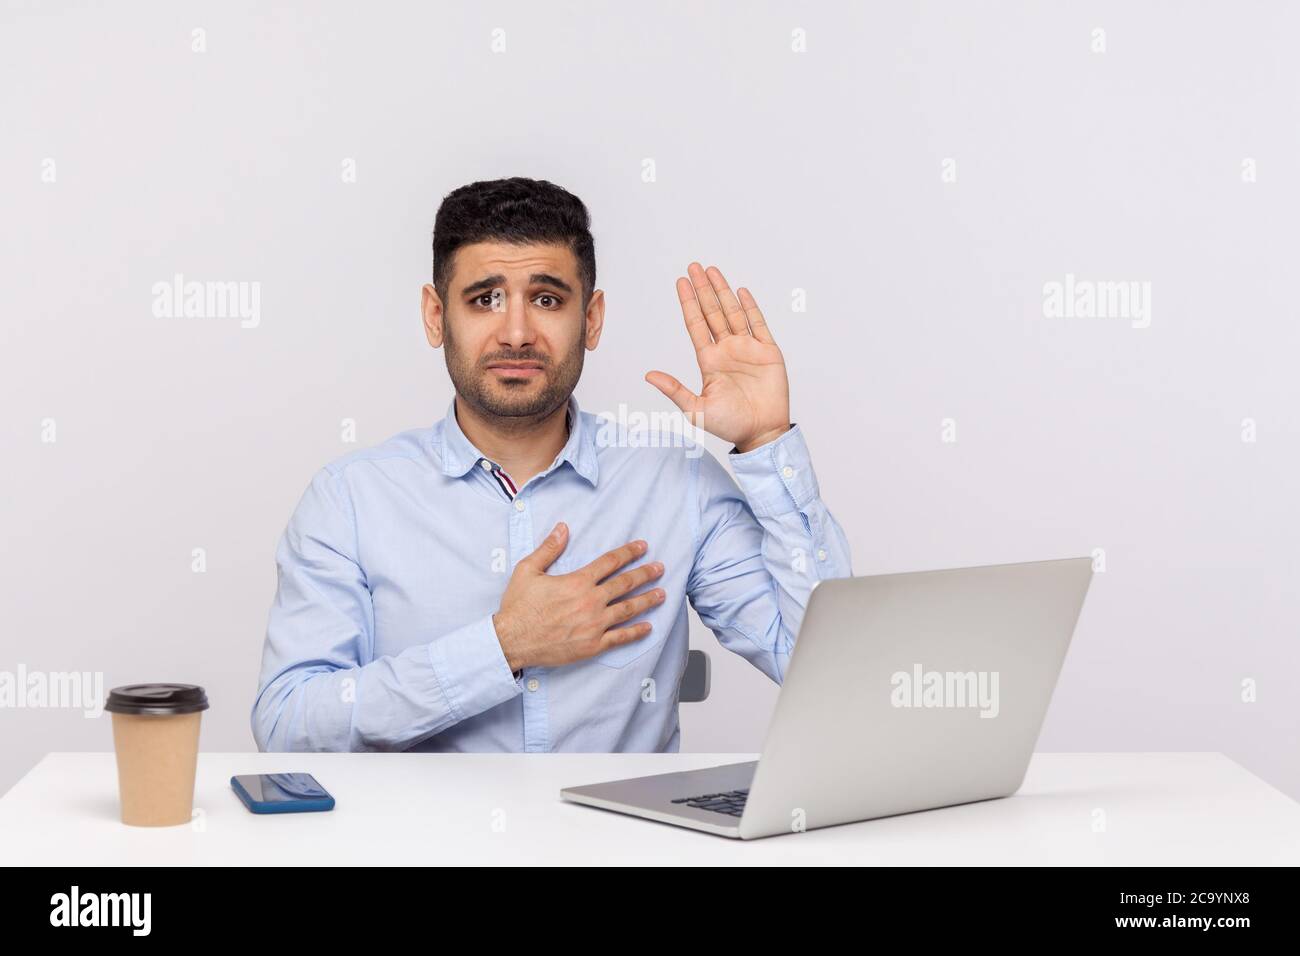 I swear! Honest businessman sitting office workplace with laptop on desk, raising hand, touching chest and making sincere promise, looking trustworthy Stock Photo